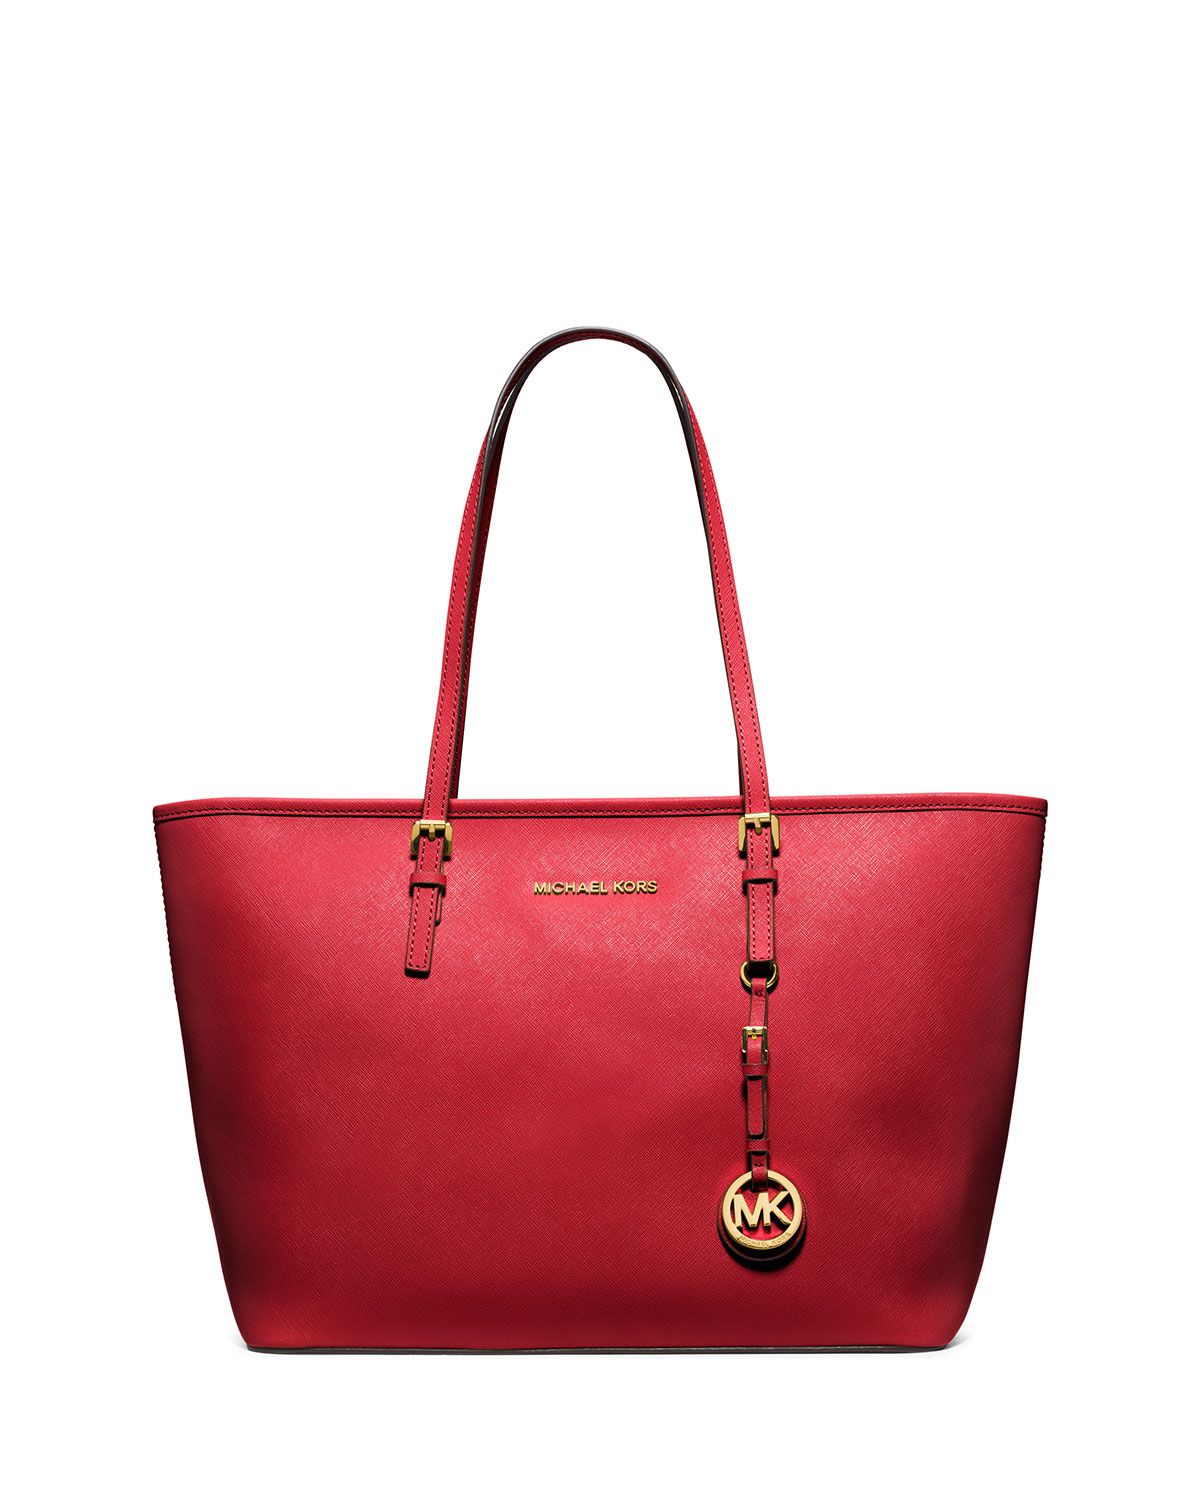 Michael michael kors Jet Set Saffiano Travel Tote Bag in Red | Lyst